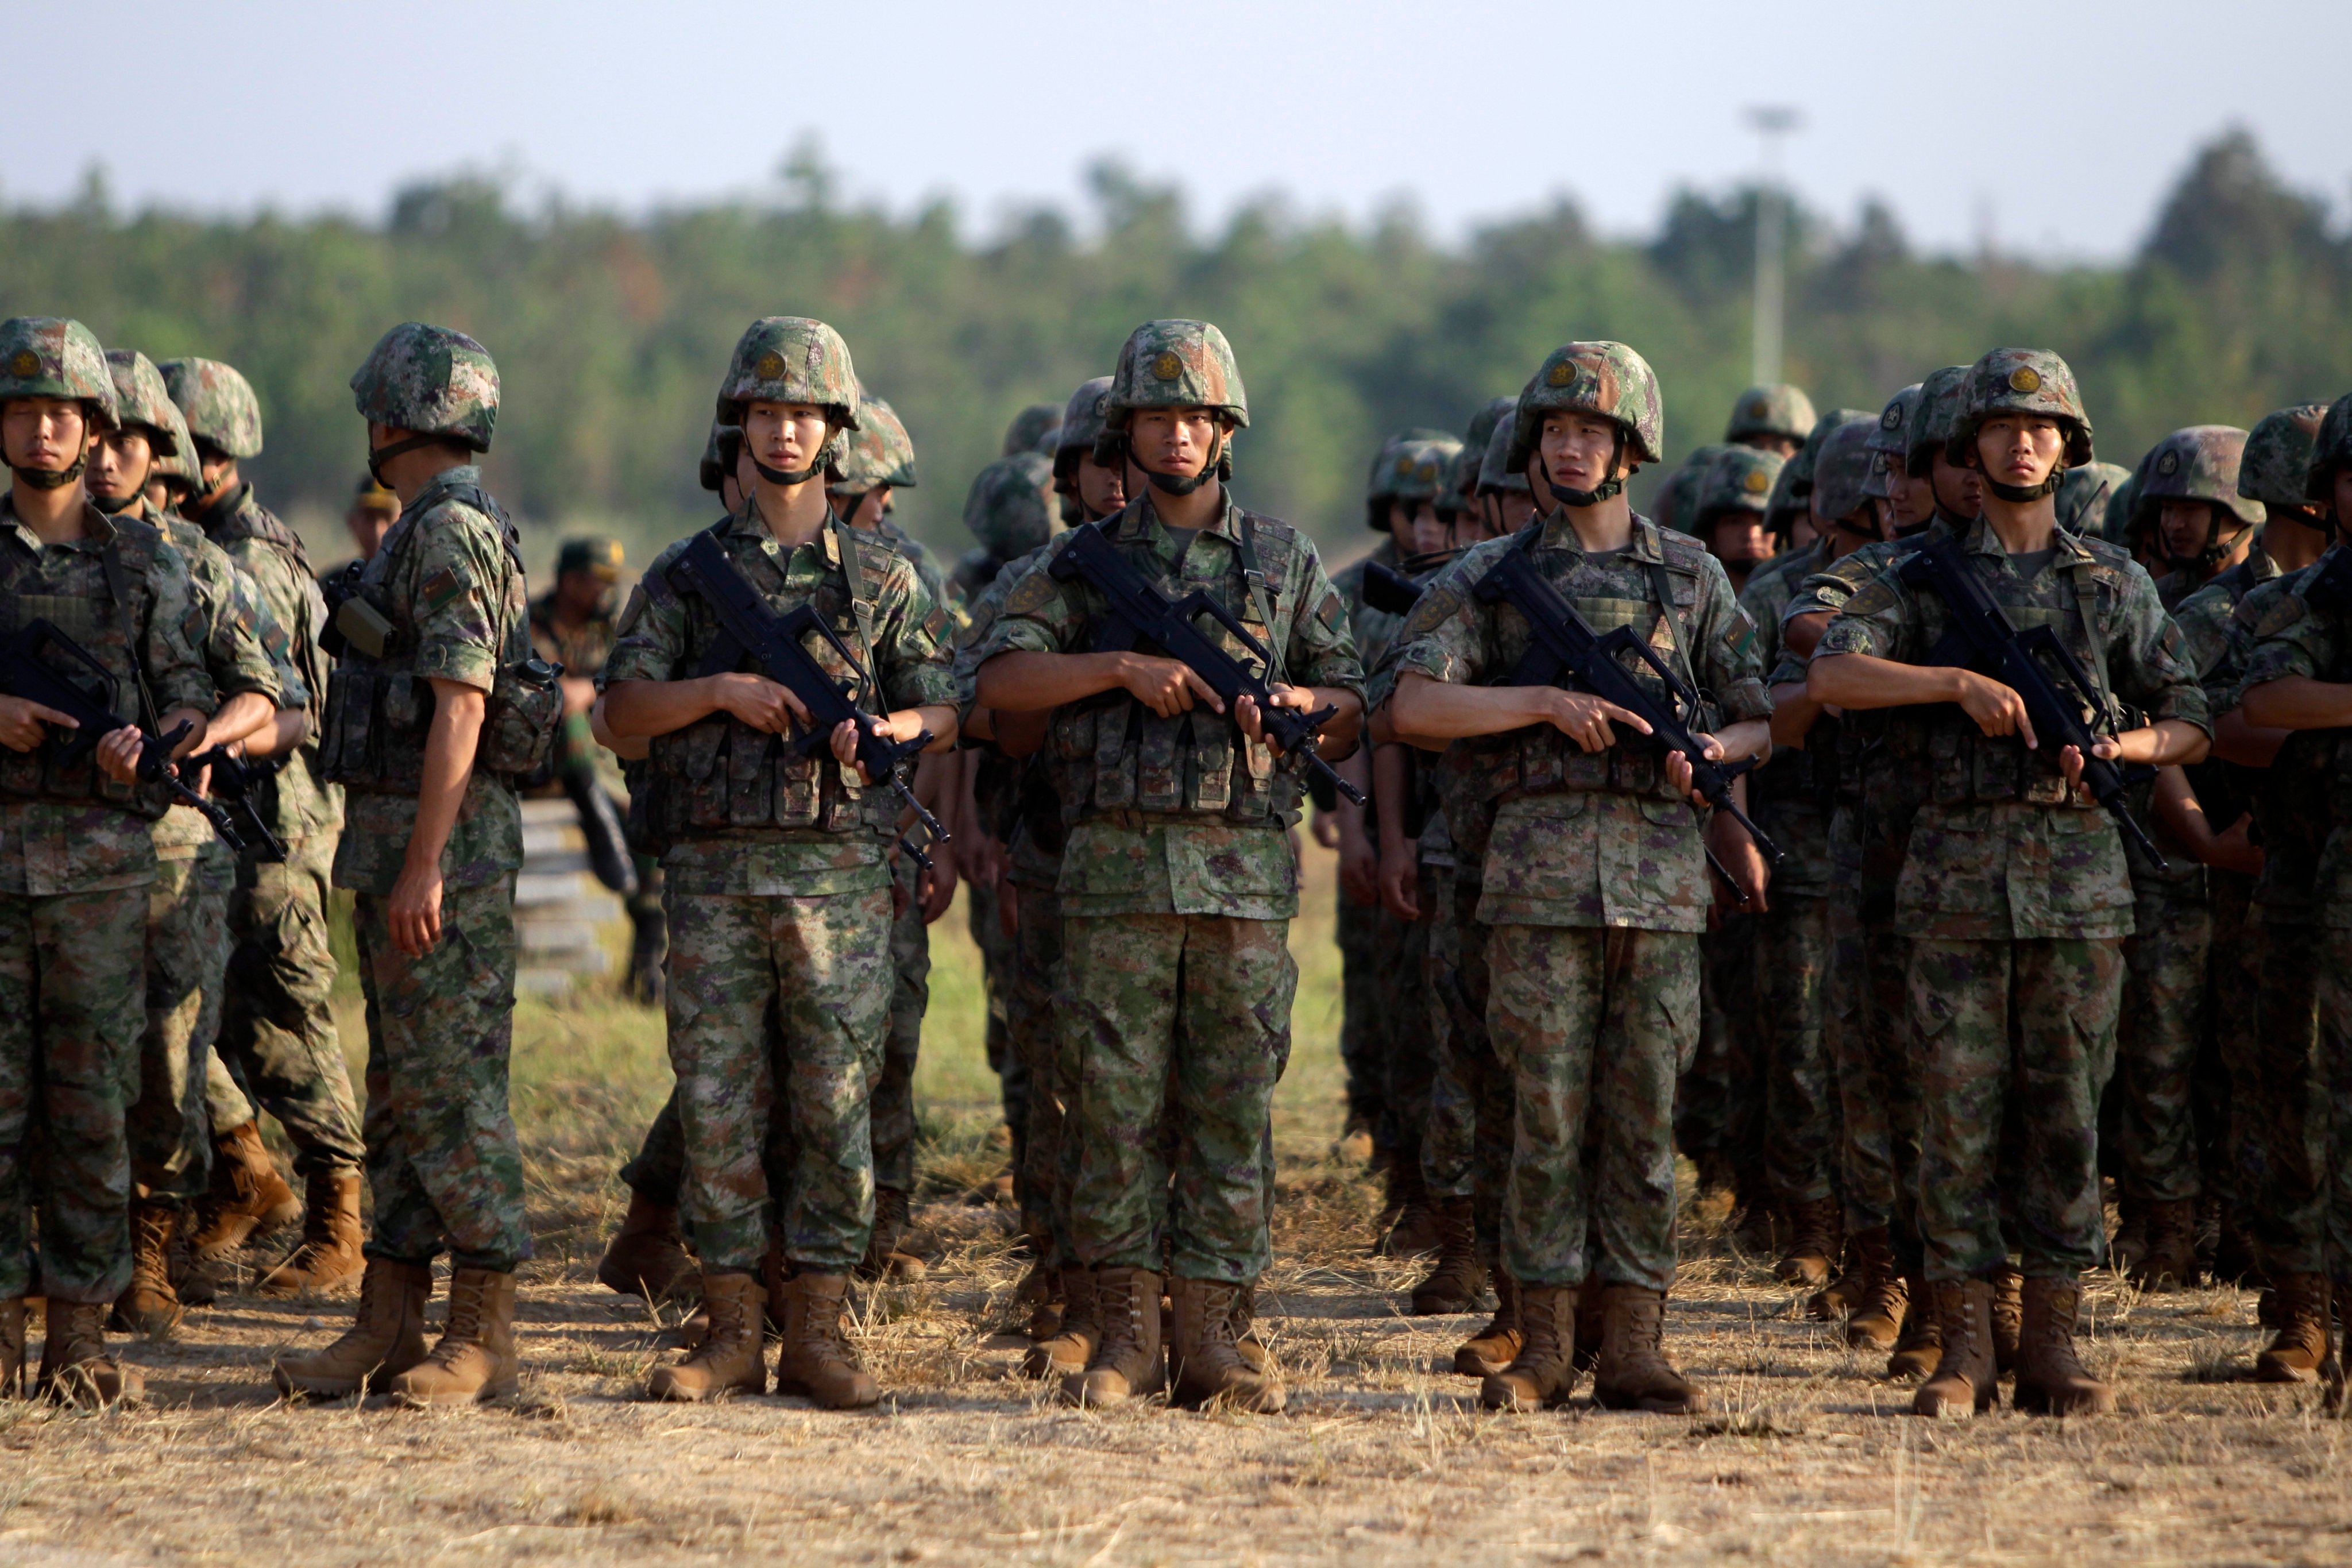 Chinese soldiers take part in the Cambodia-China “Golden Dragon 2023” joint military exercise at the Royal Gendarmerie Training Centre in Cambodia on March 23. Photo: Xinhua